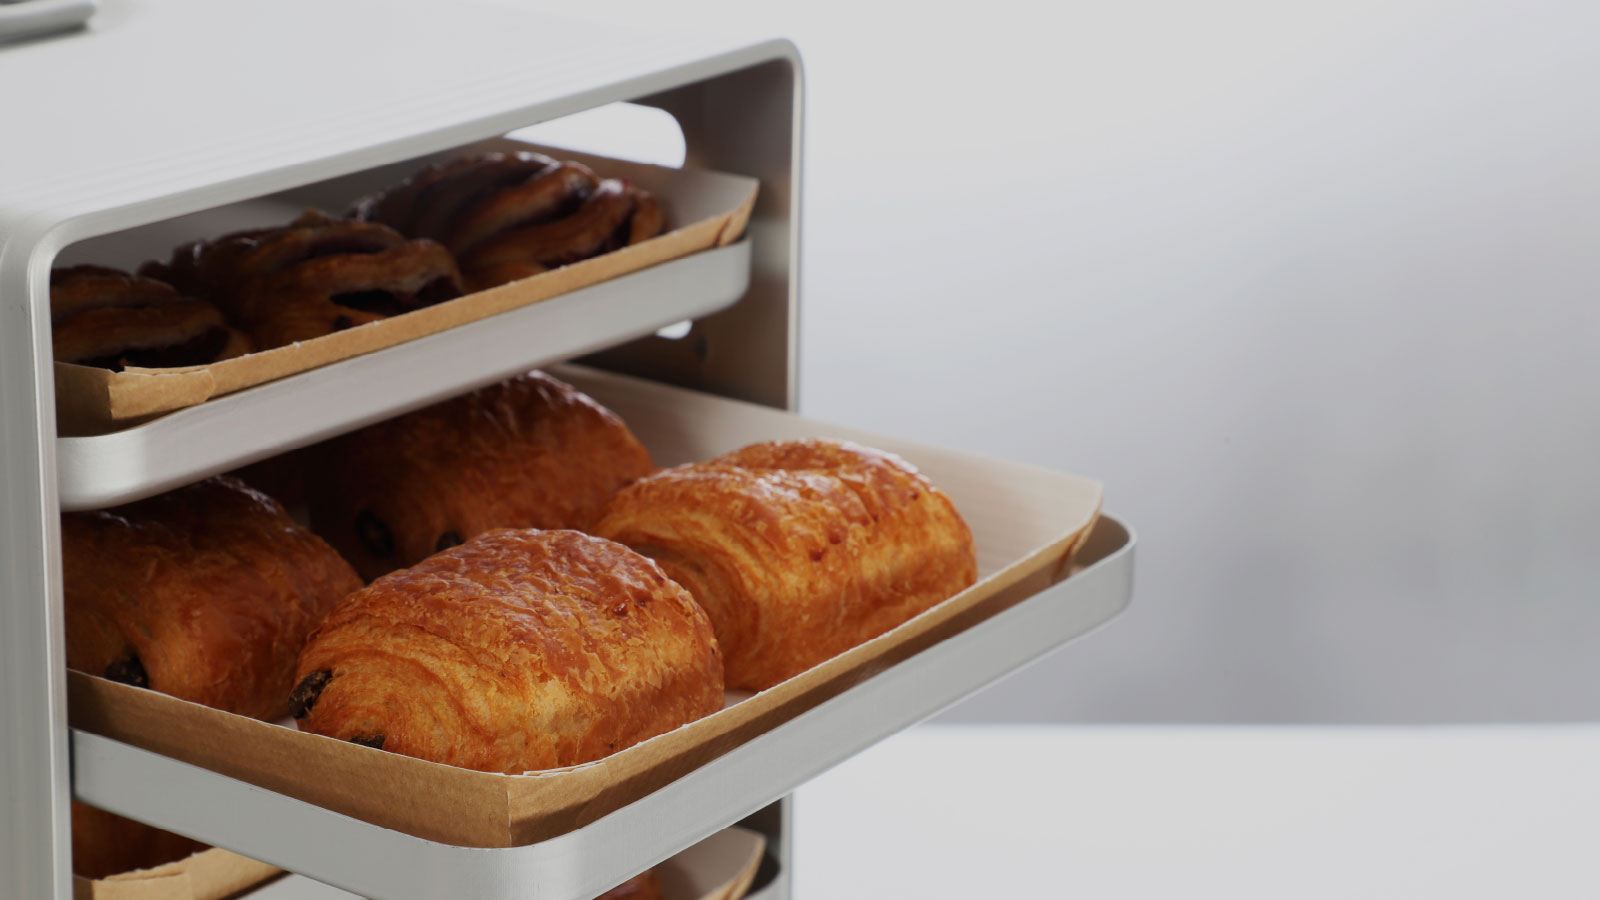 Viennoiserie products